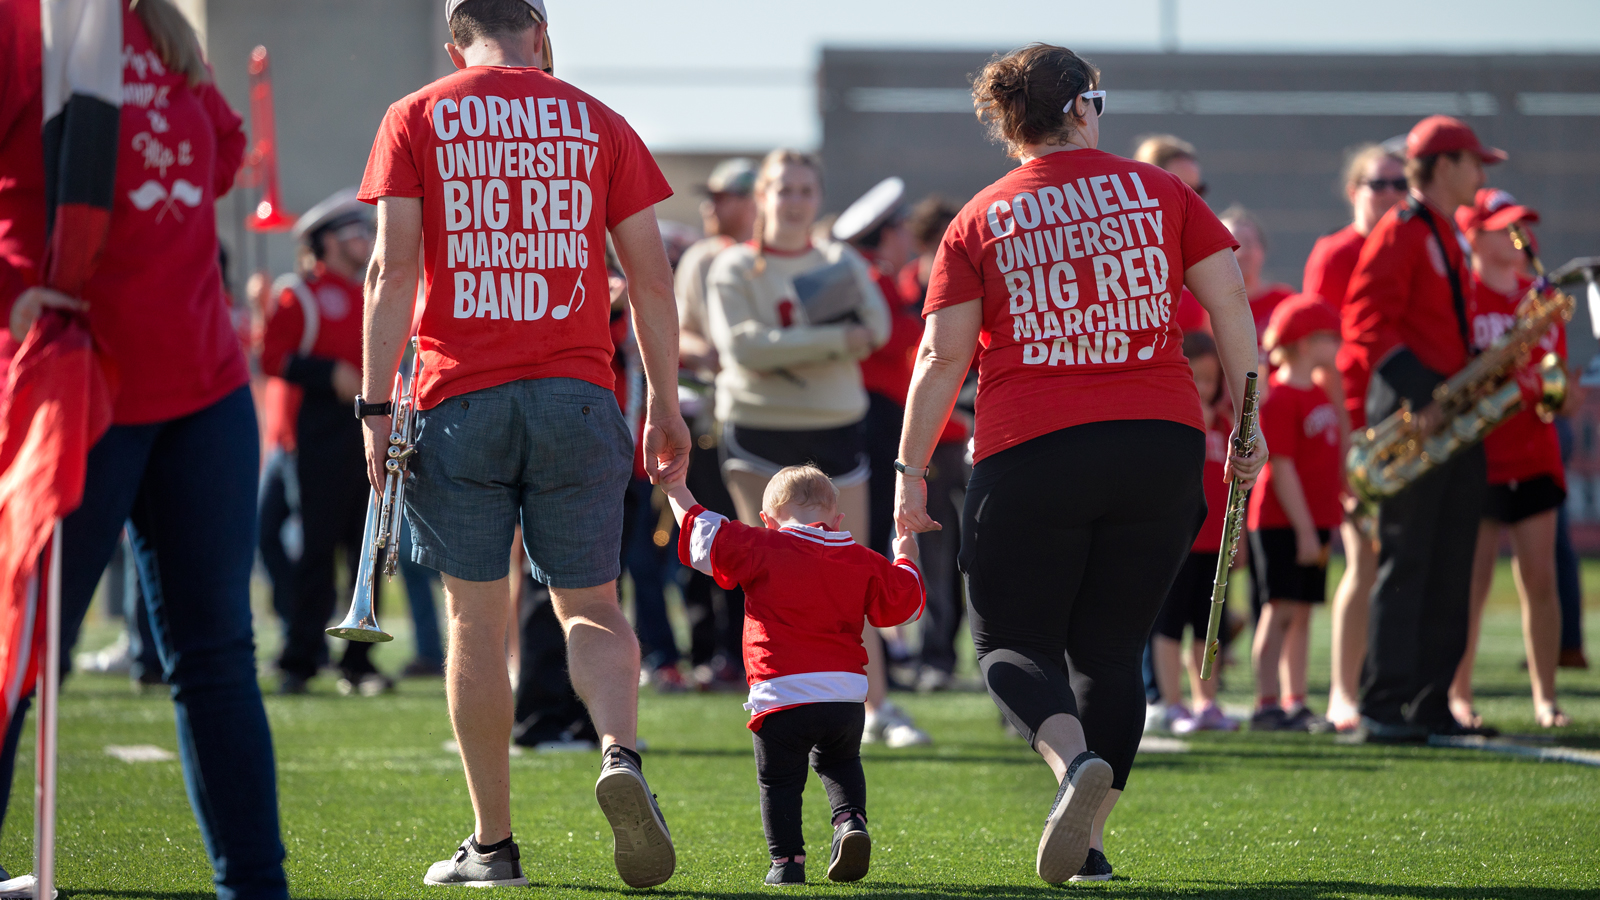 Two Big Red Marching Band alums walk on Schoellkopf Field with a small child